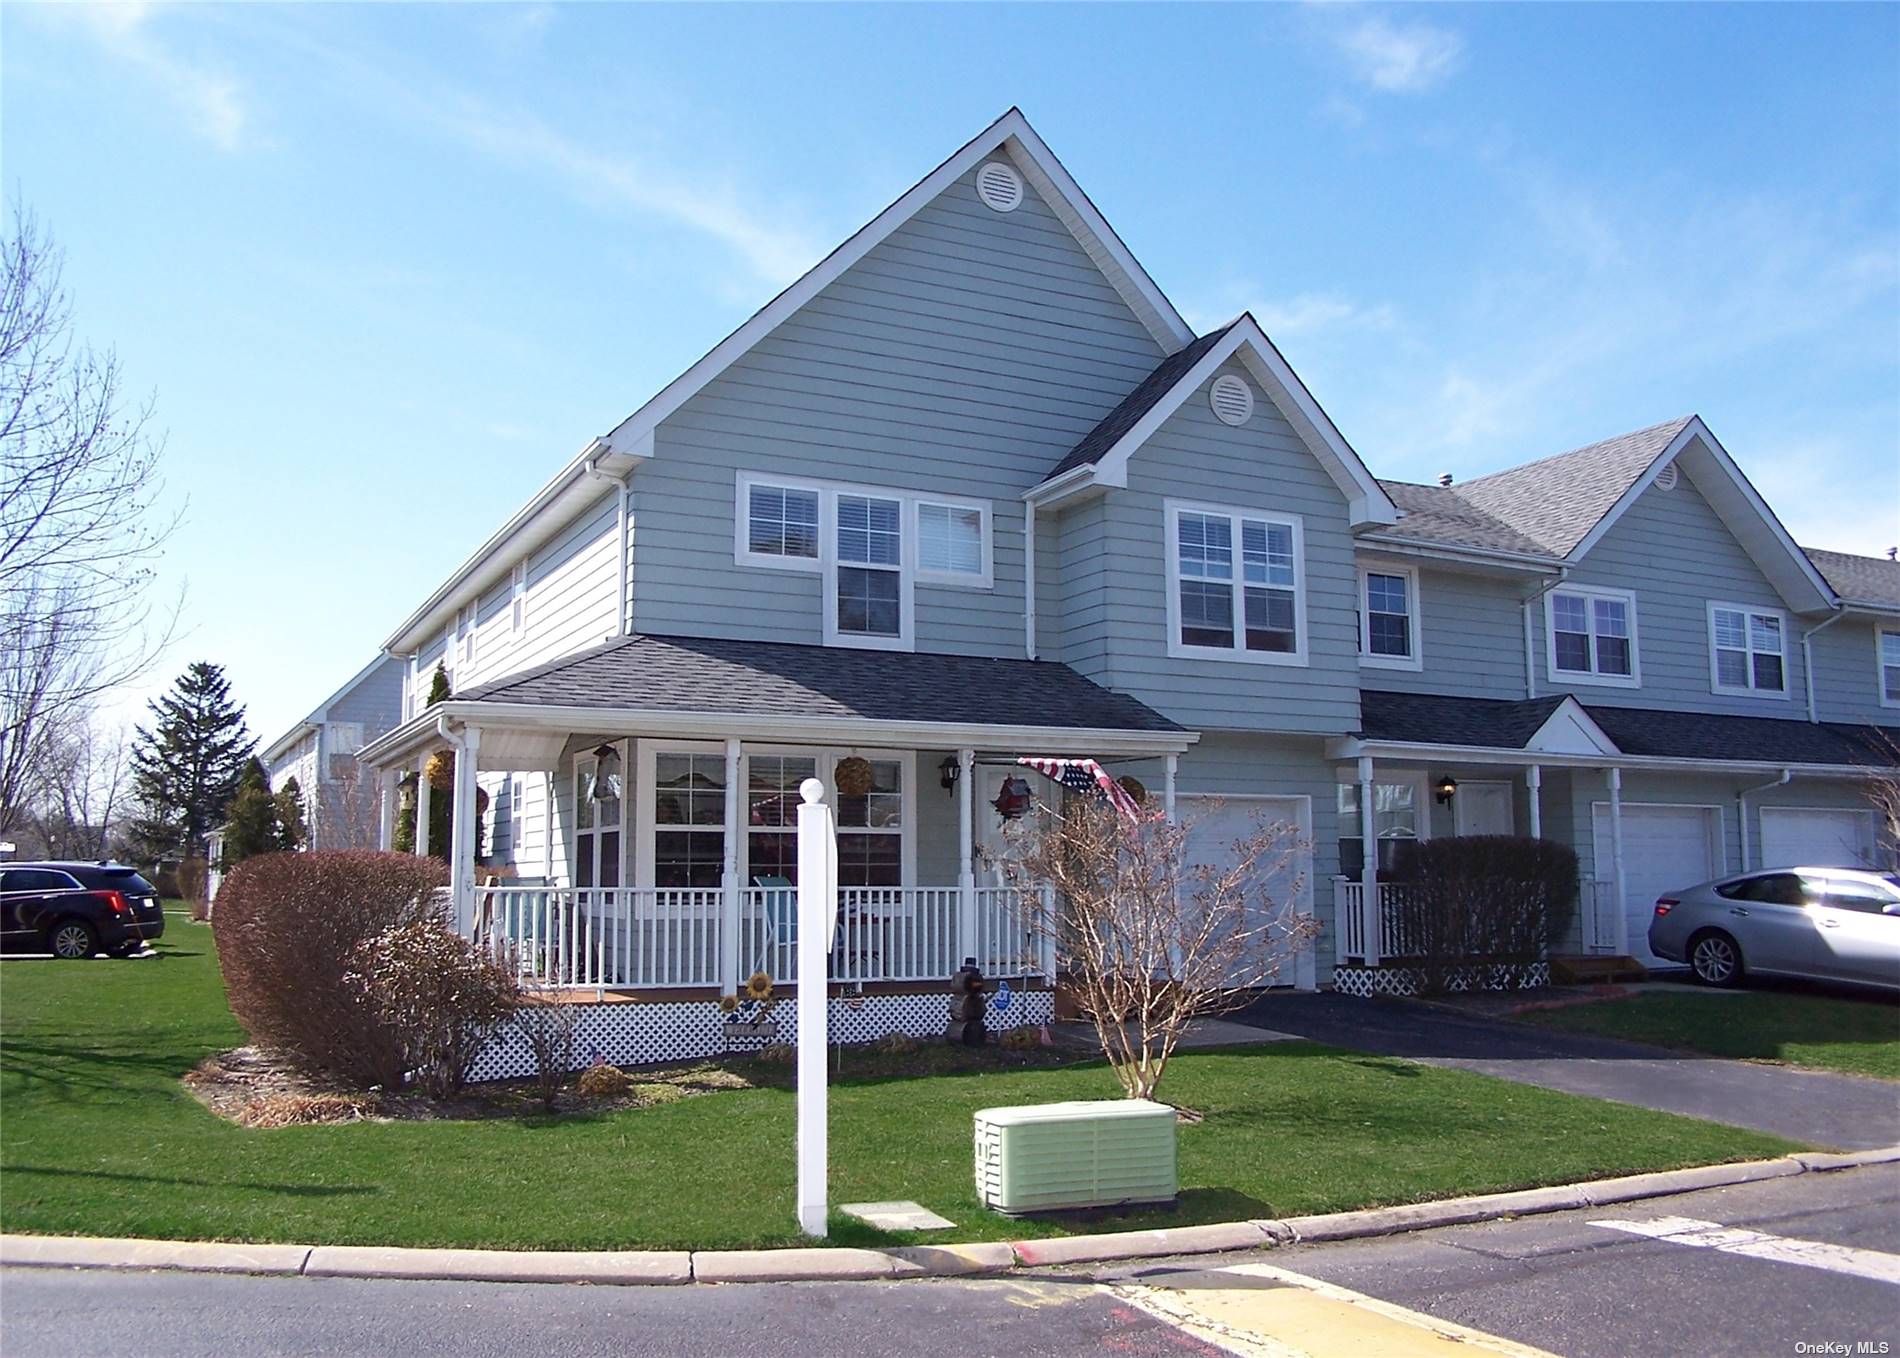 View Central Islip, NY 11722 townhome